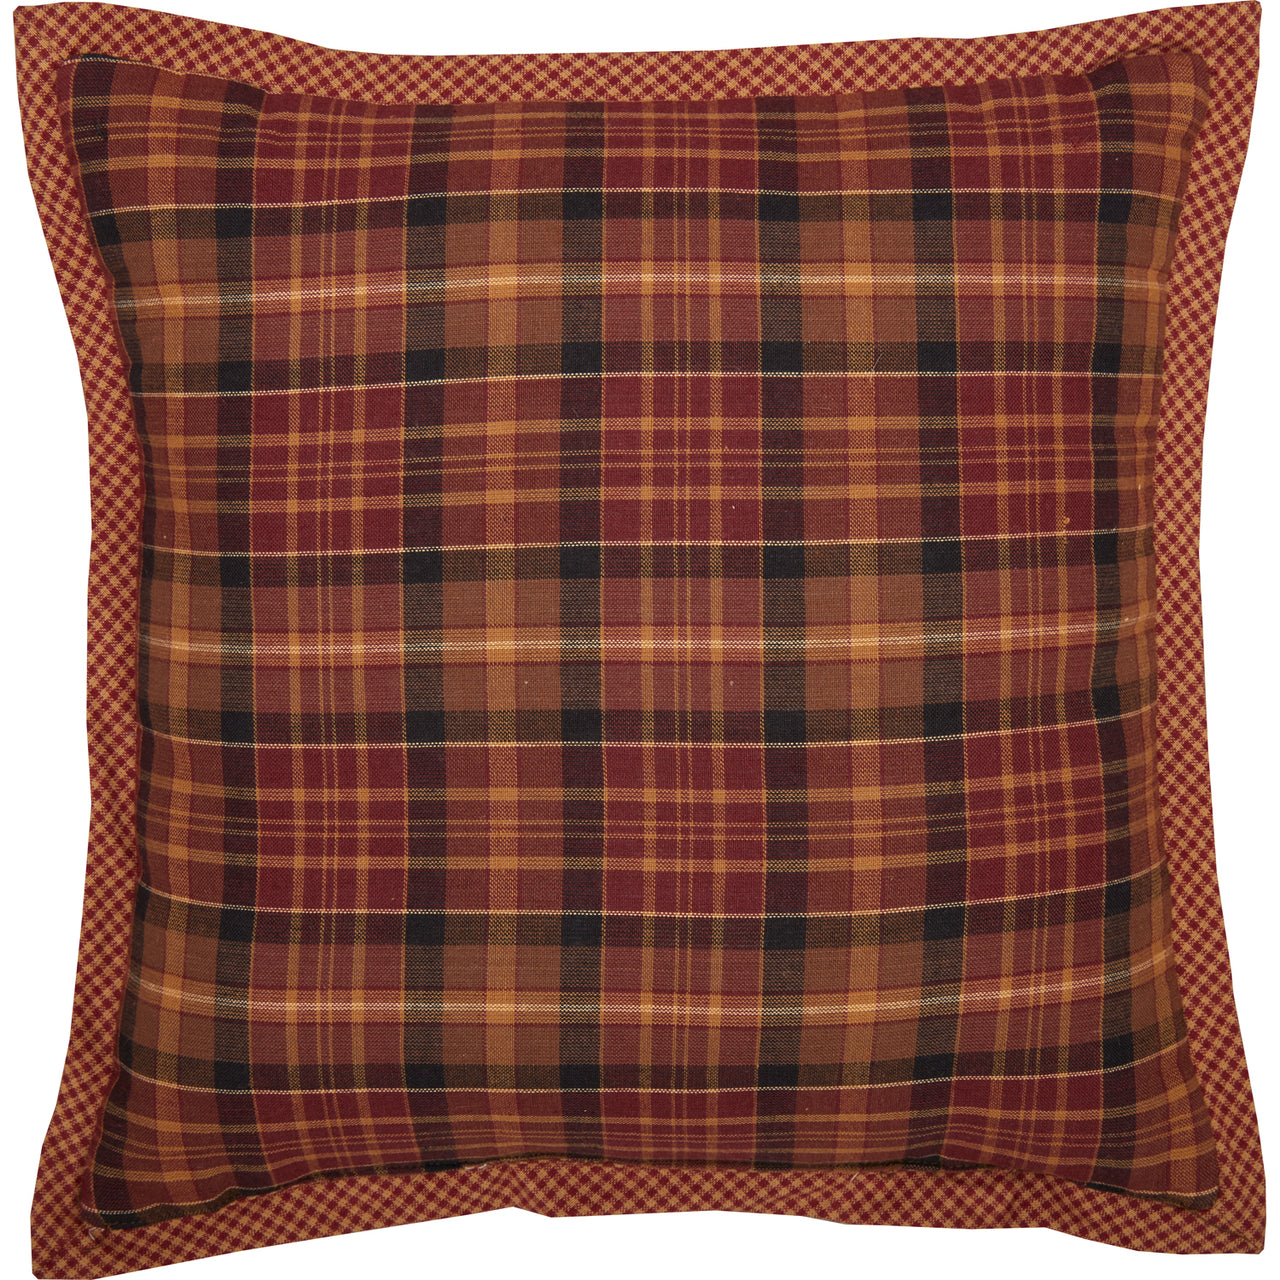 Abilene Star Quilted Pillow 12x12